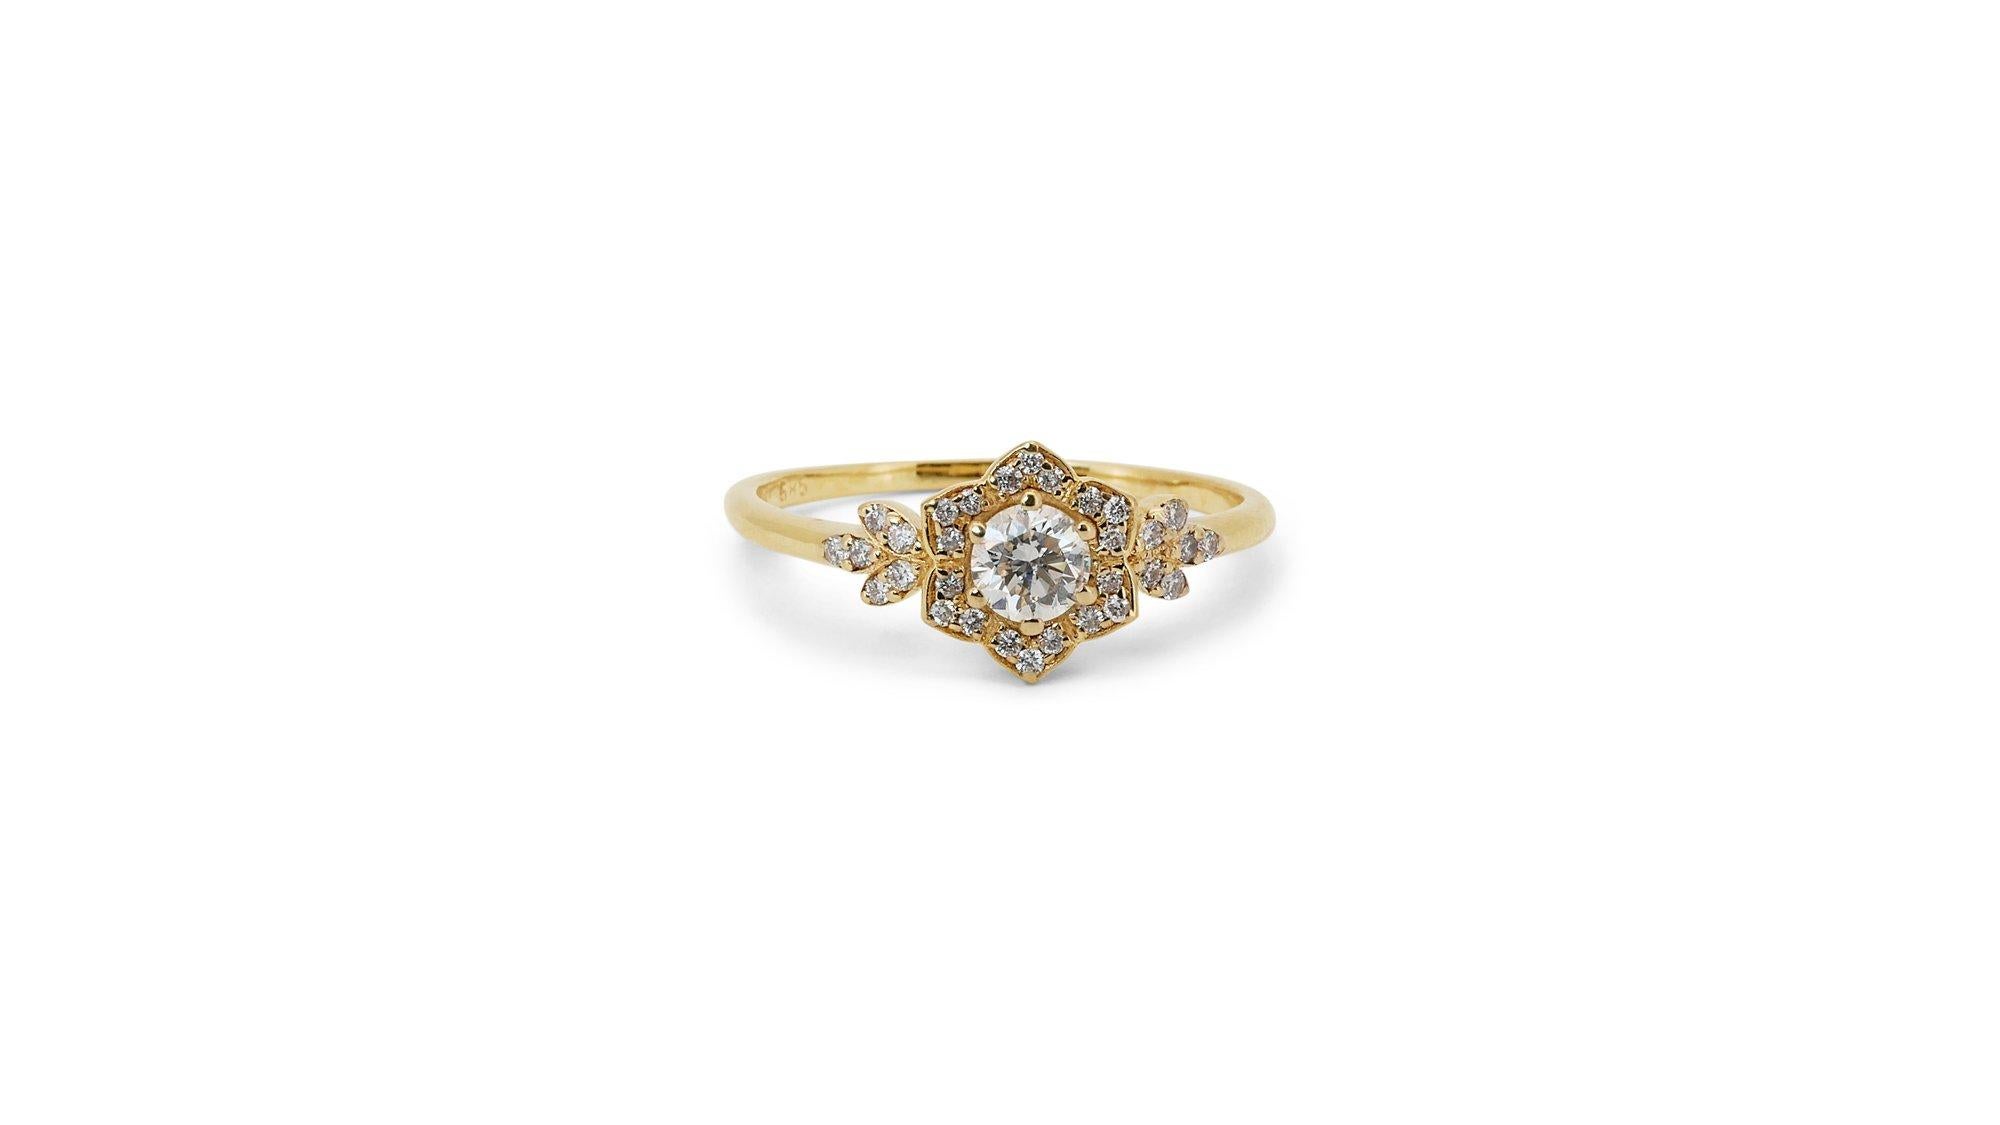 A beautiful cluster ring with a dazzling 0.3 carat round brilliant natural diamond. It has 0.2 carat of side diamonds which add more to its elegance. The jewelry is made of 14K Yellow Gold with a high quality polish. It comes with AIG certificate